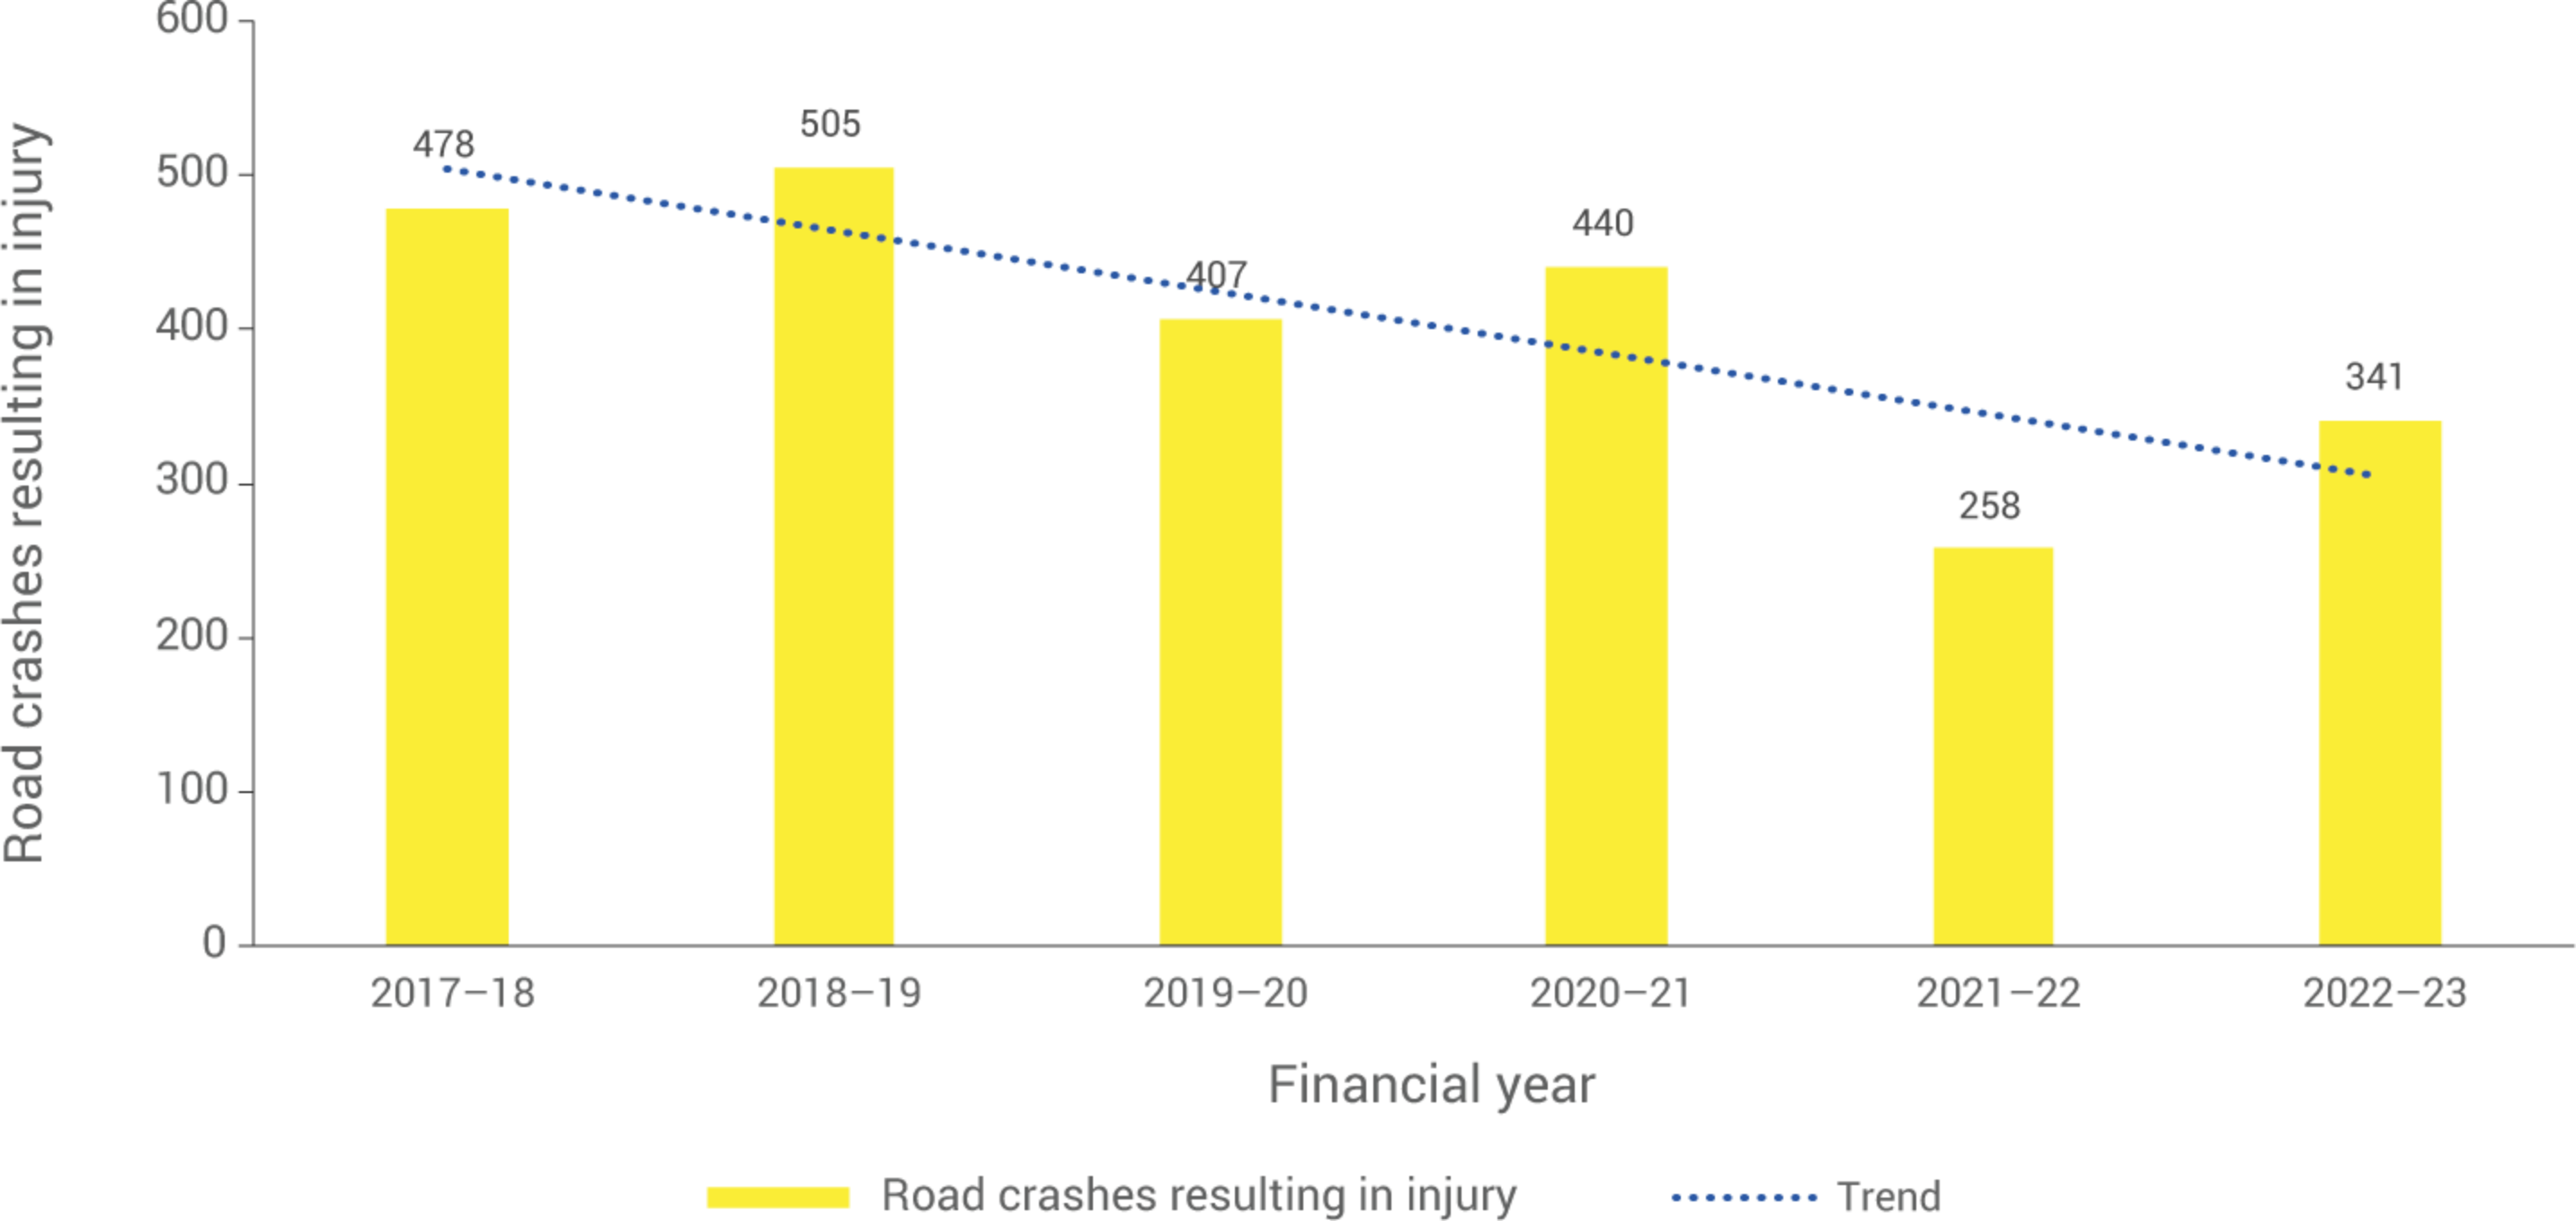 This Figure is a column graph depicting the number of road crashes resulting in injury per 100,000 population. This is broken down over the past six financial years.